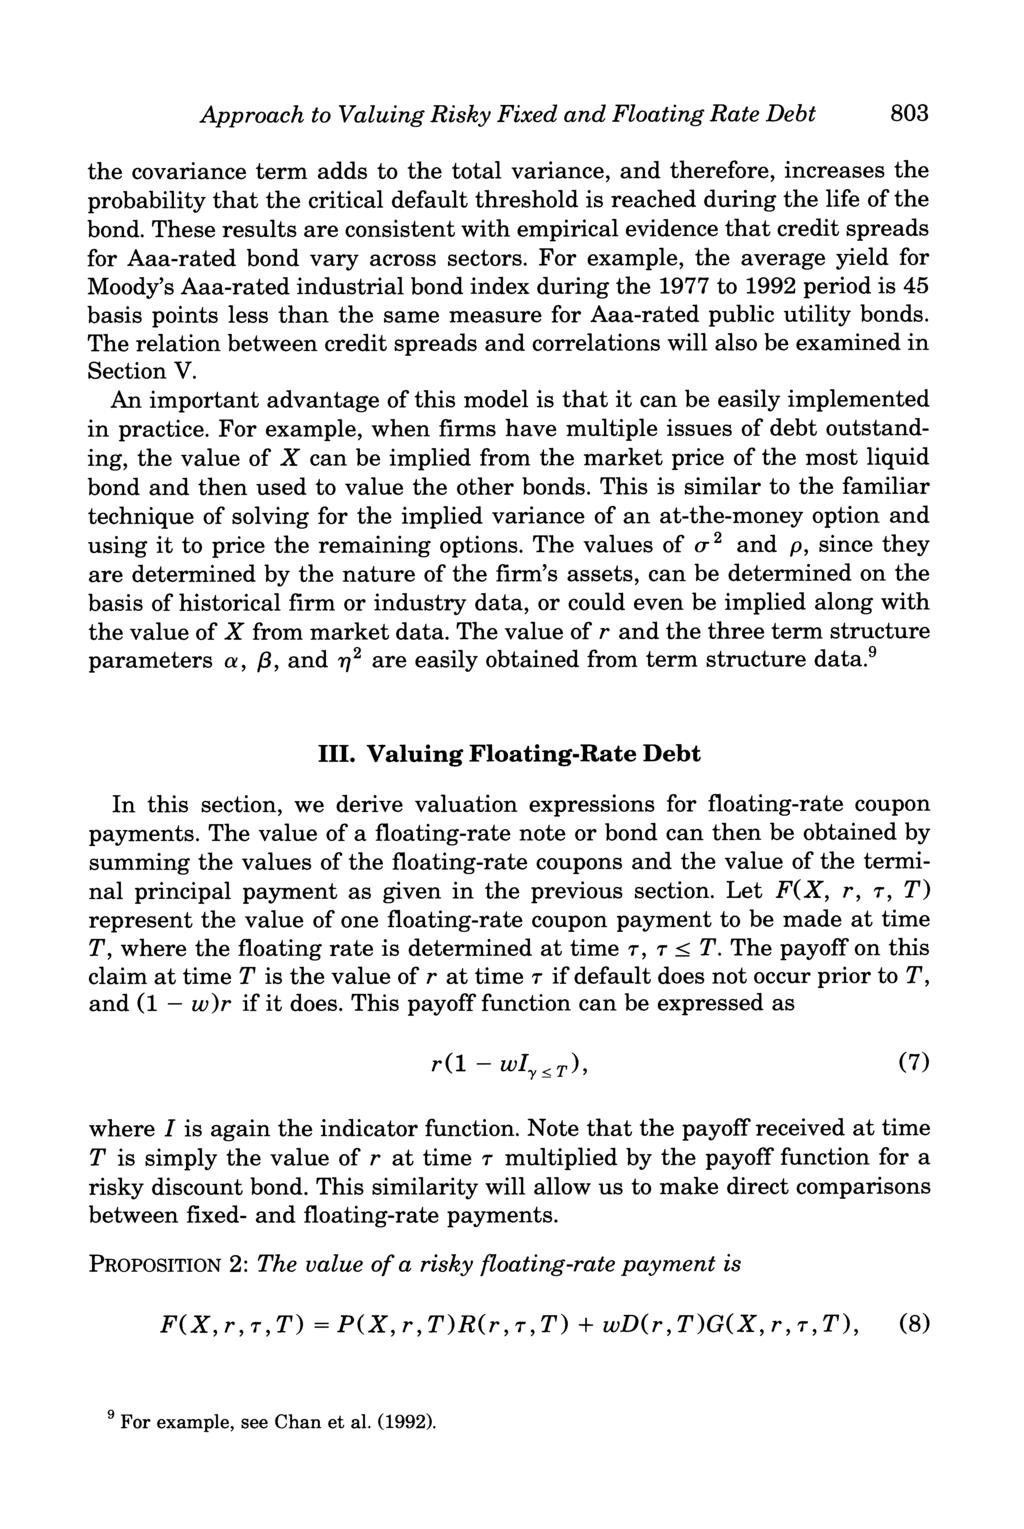 Approach to Valuing Risky Fixed and Floating Rate Debt 803 the covariance term adds to the total variance, and therefore, increases the probability that the critical default threshold is reached